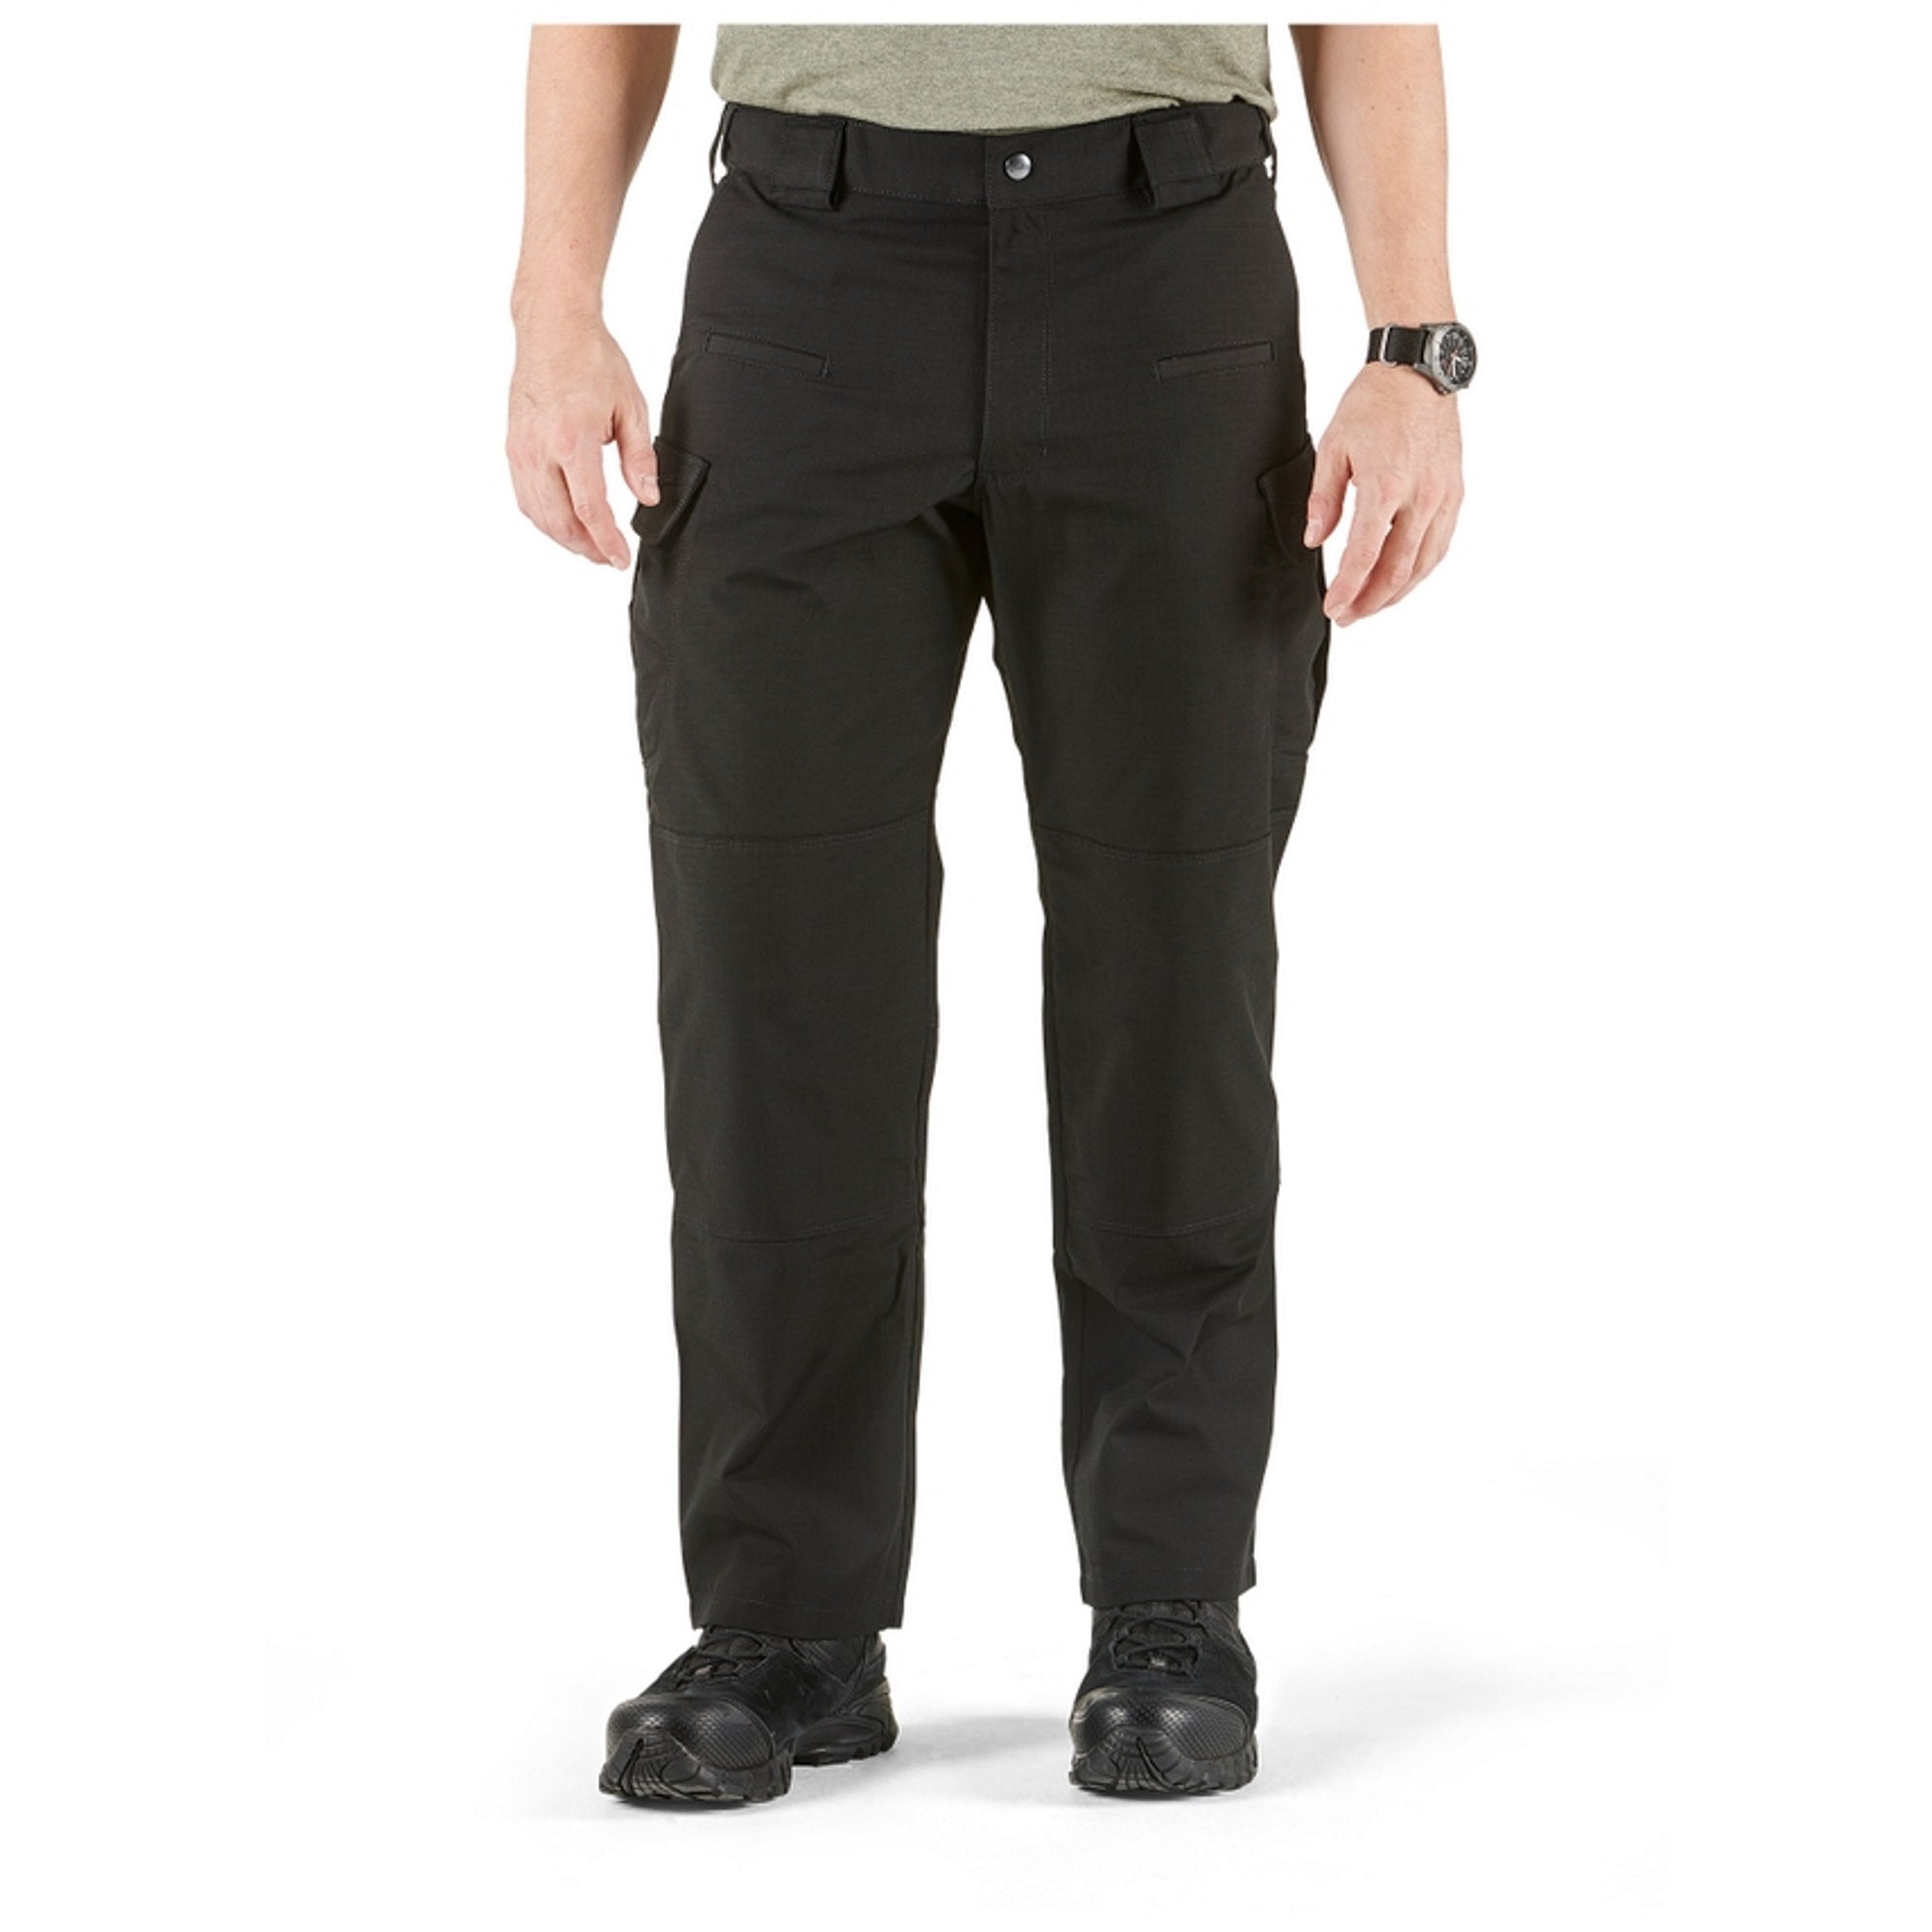 511 Tactical Pants Cotton  Hunting Pants  Ray Allen Manufacturing